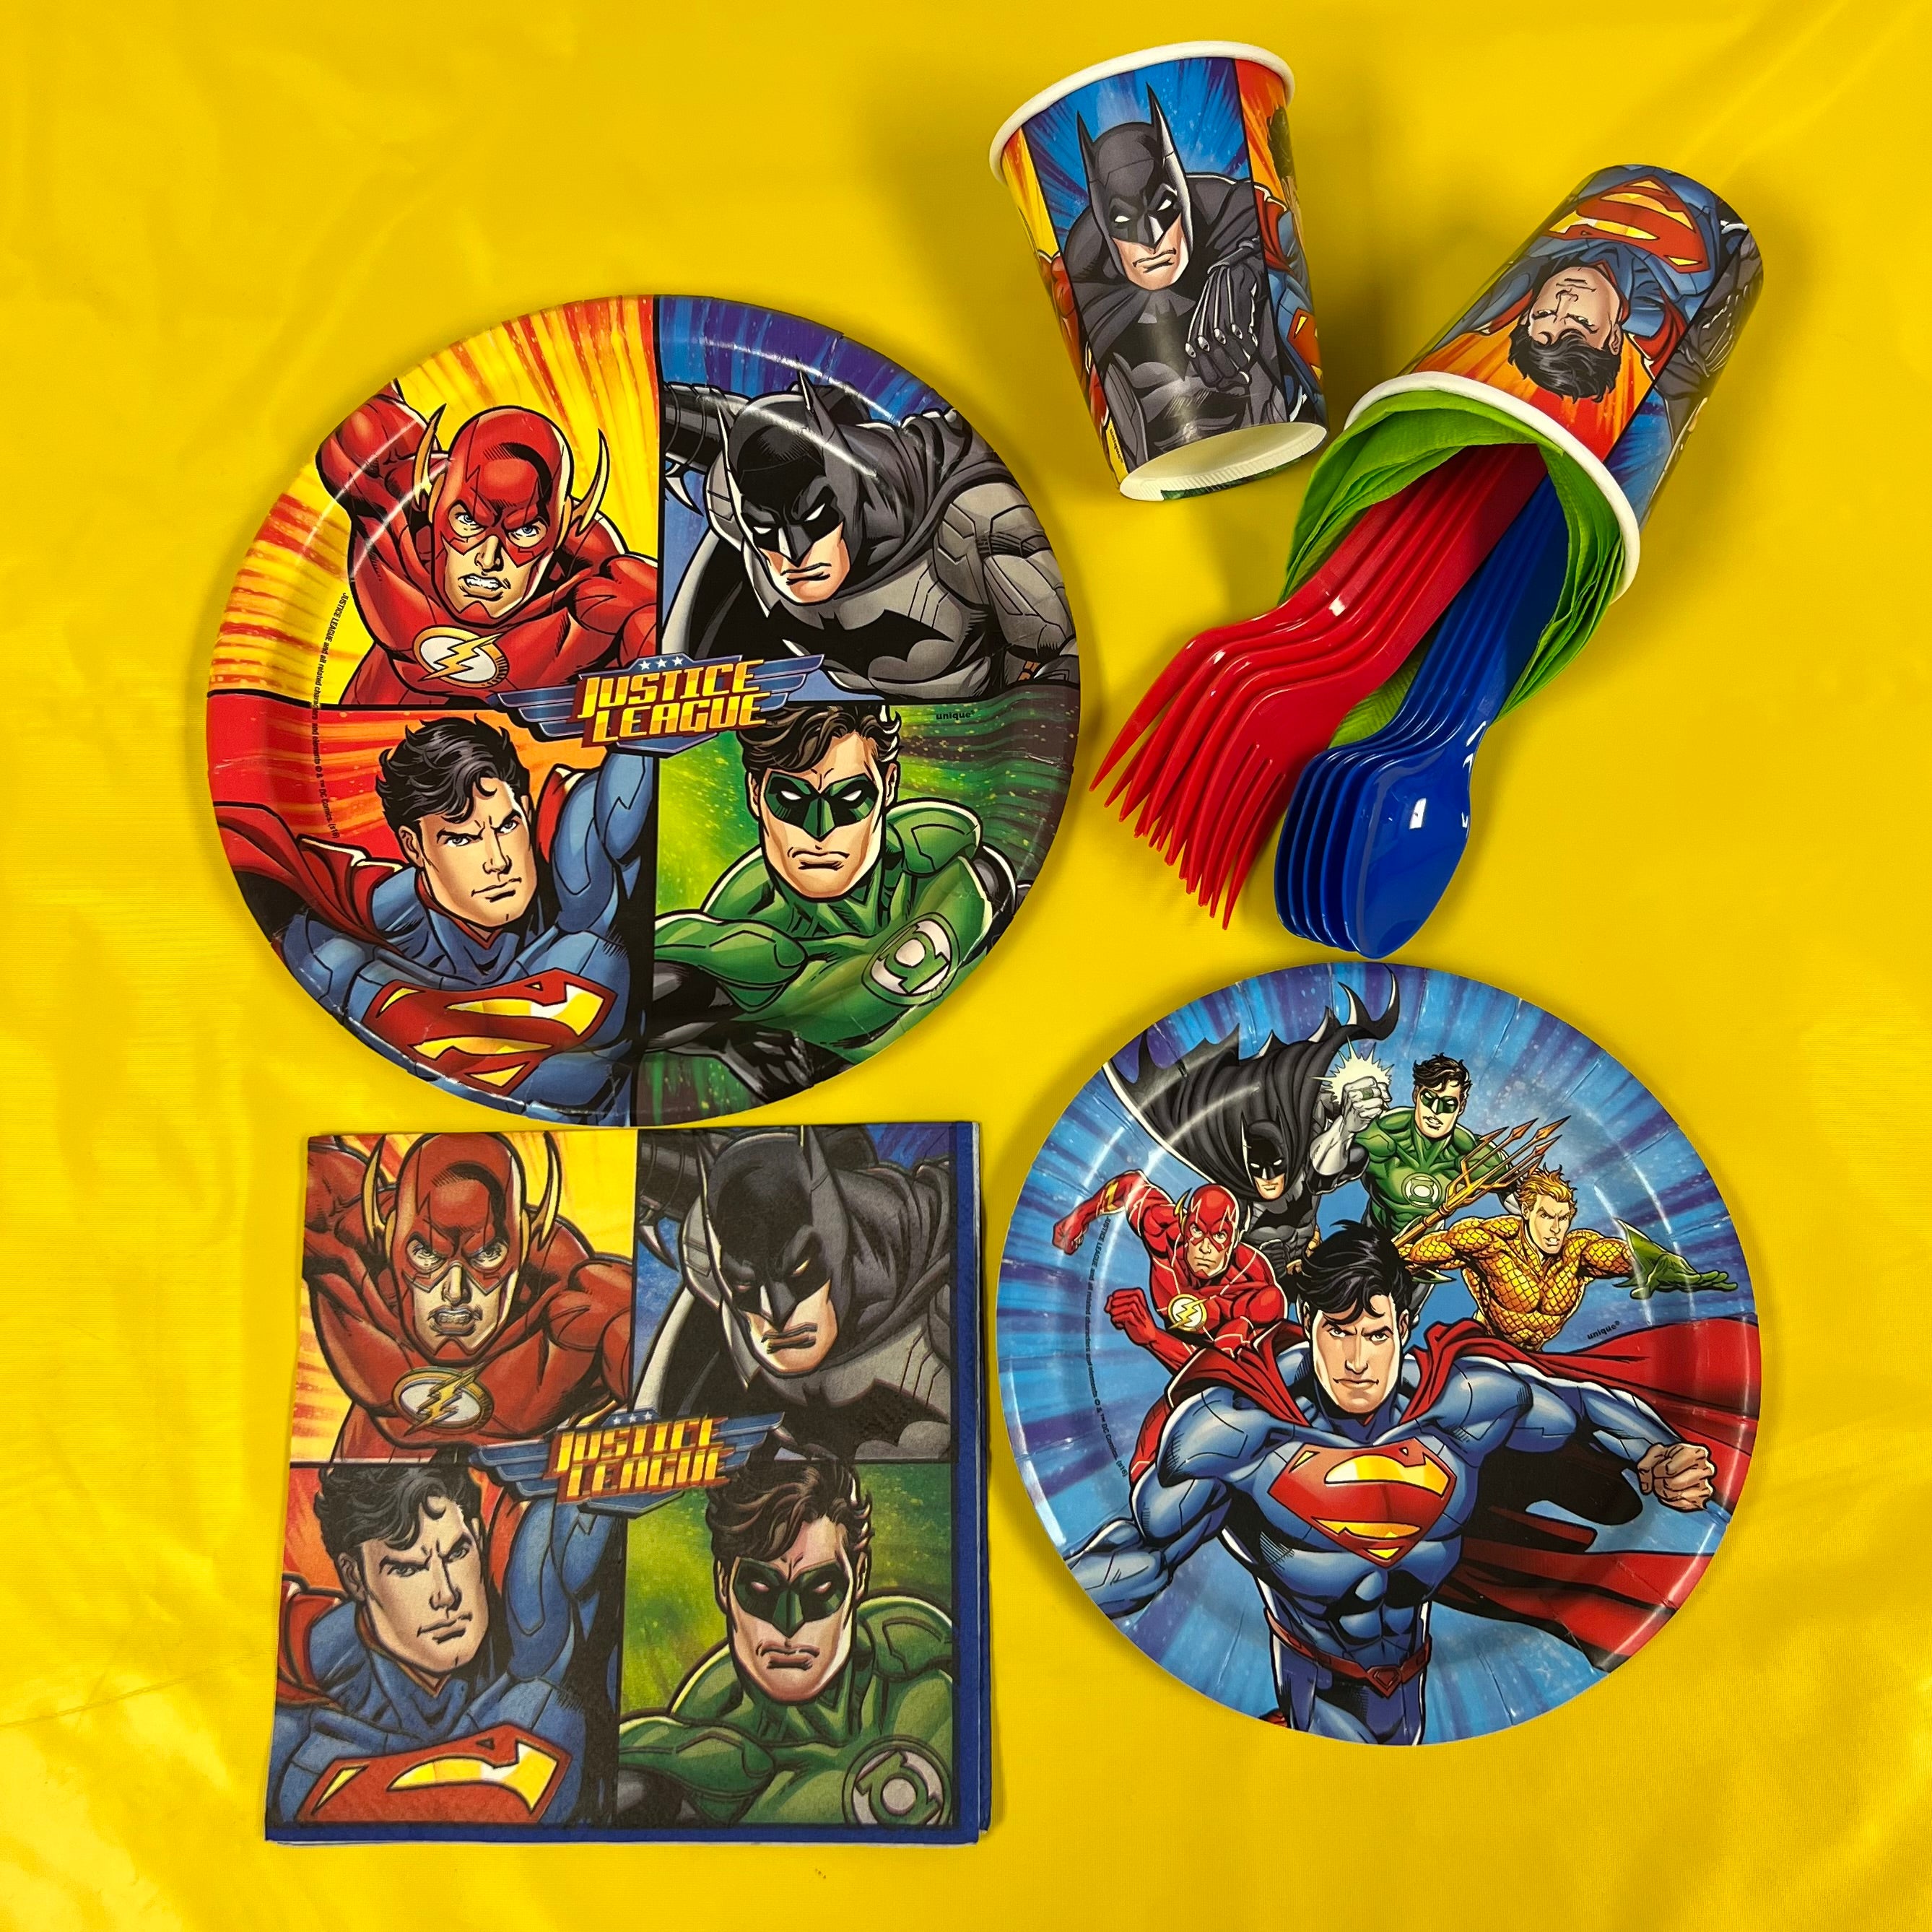 Justice League Themed Supplies